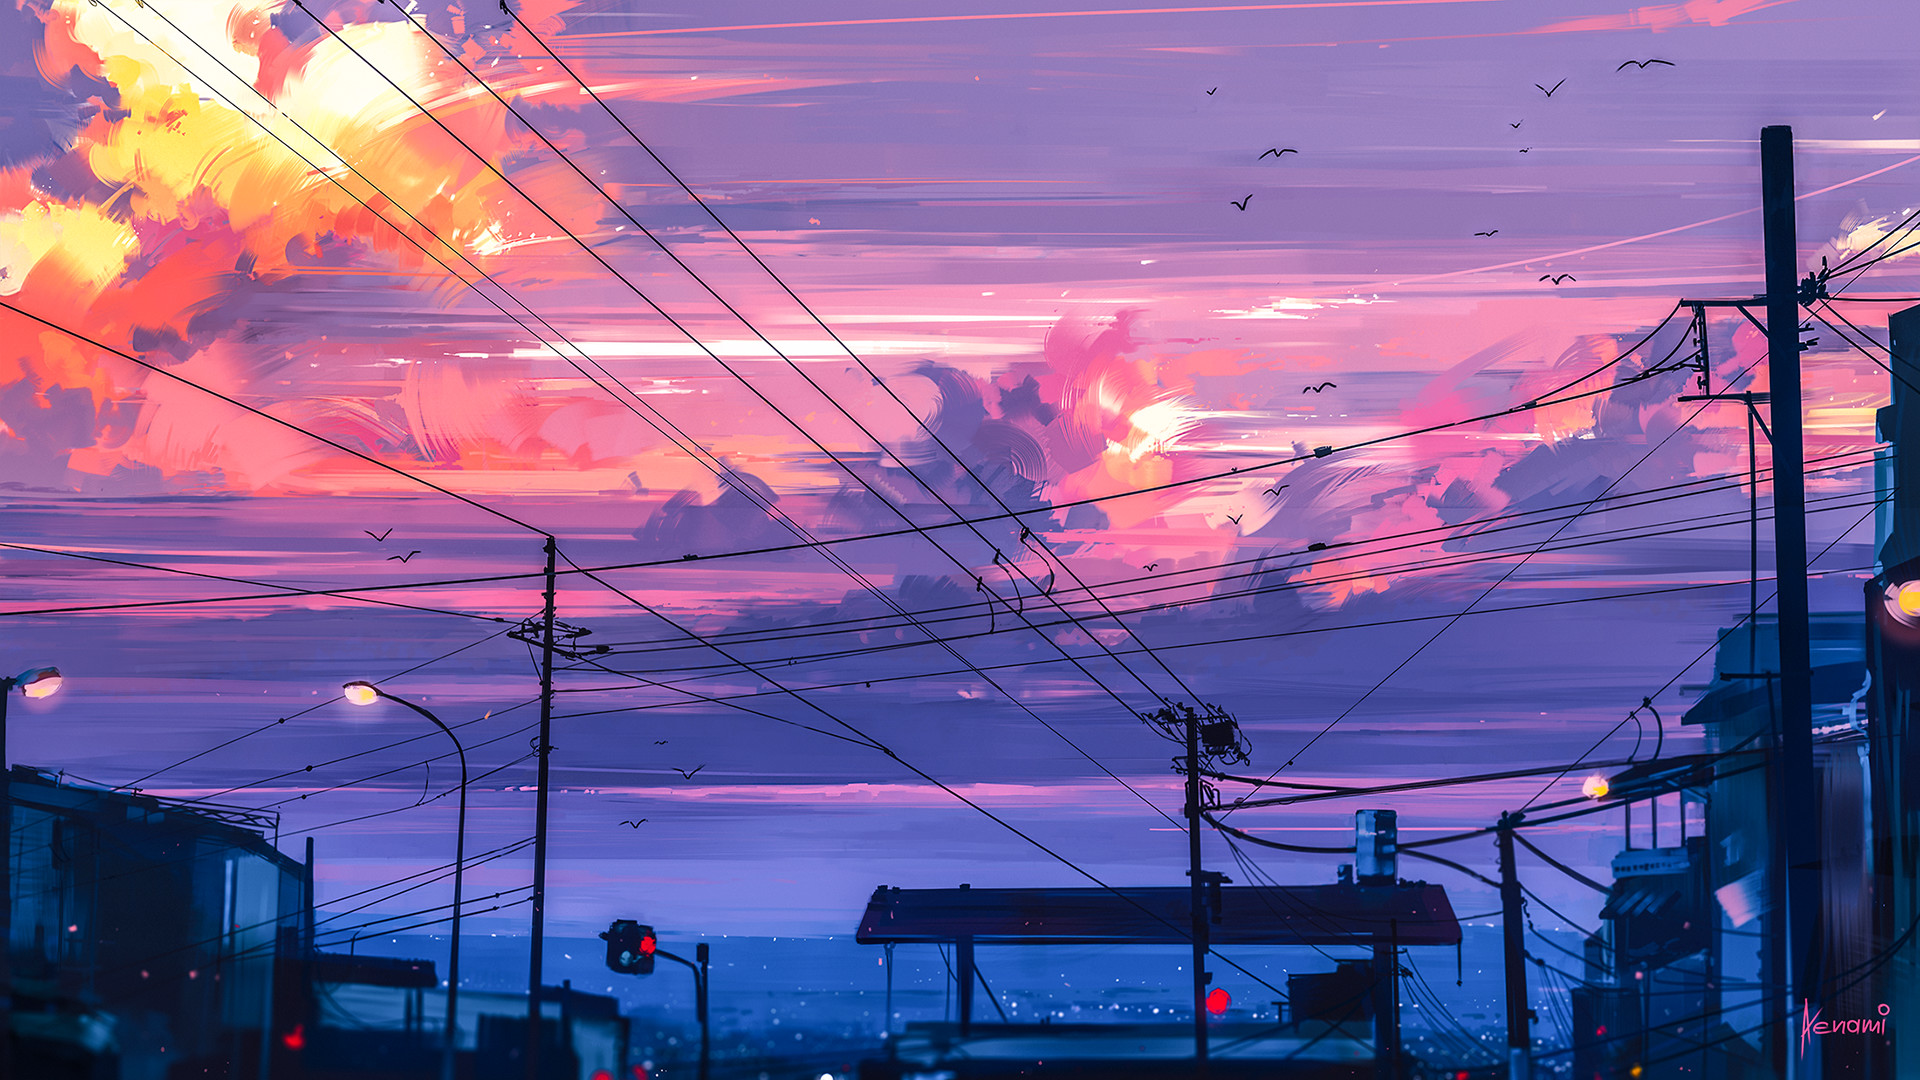 General 1920x1080 digital art illustration sunset city clouds artwork lines town painting street drawing Aenami